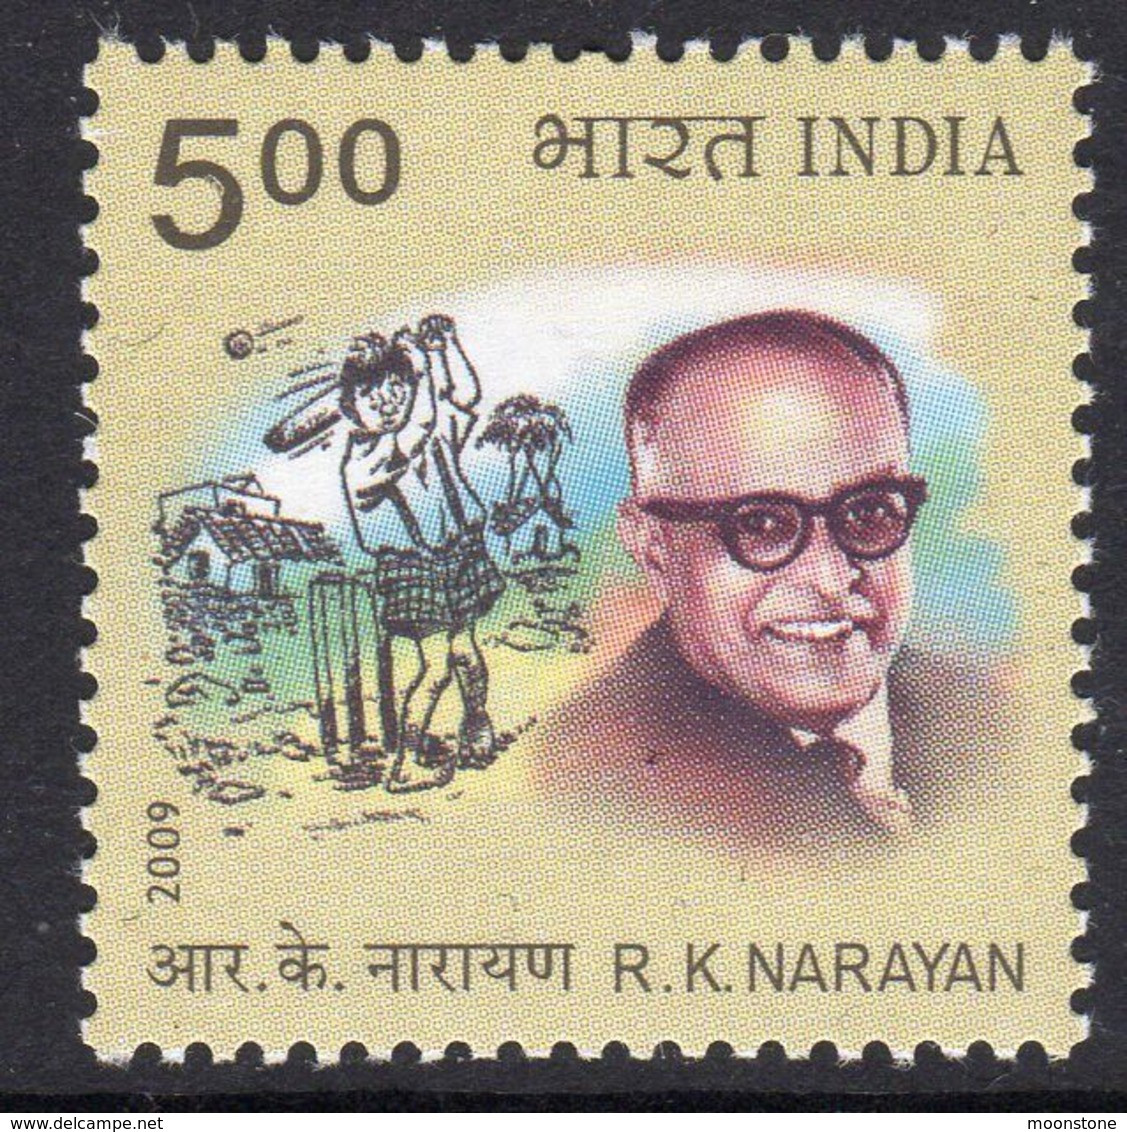 India 2009 R.K. Narayan Commemoration, MNH, SG 2632 (D) - Unused Stamps